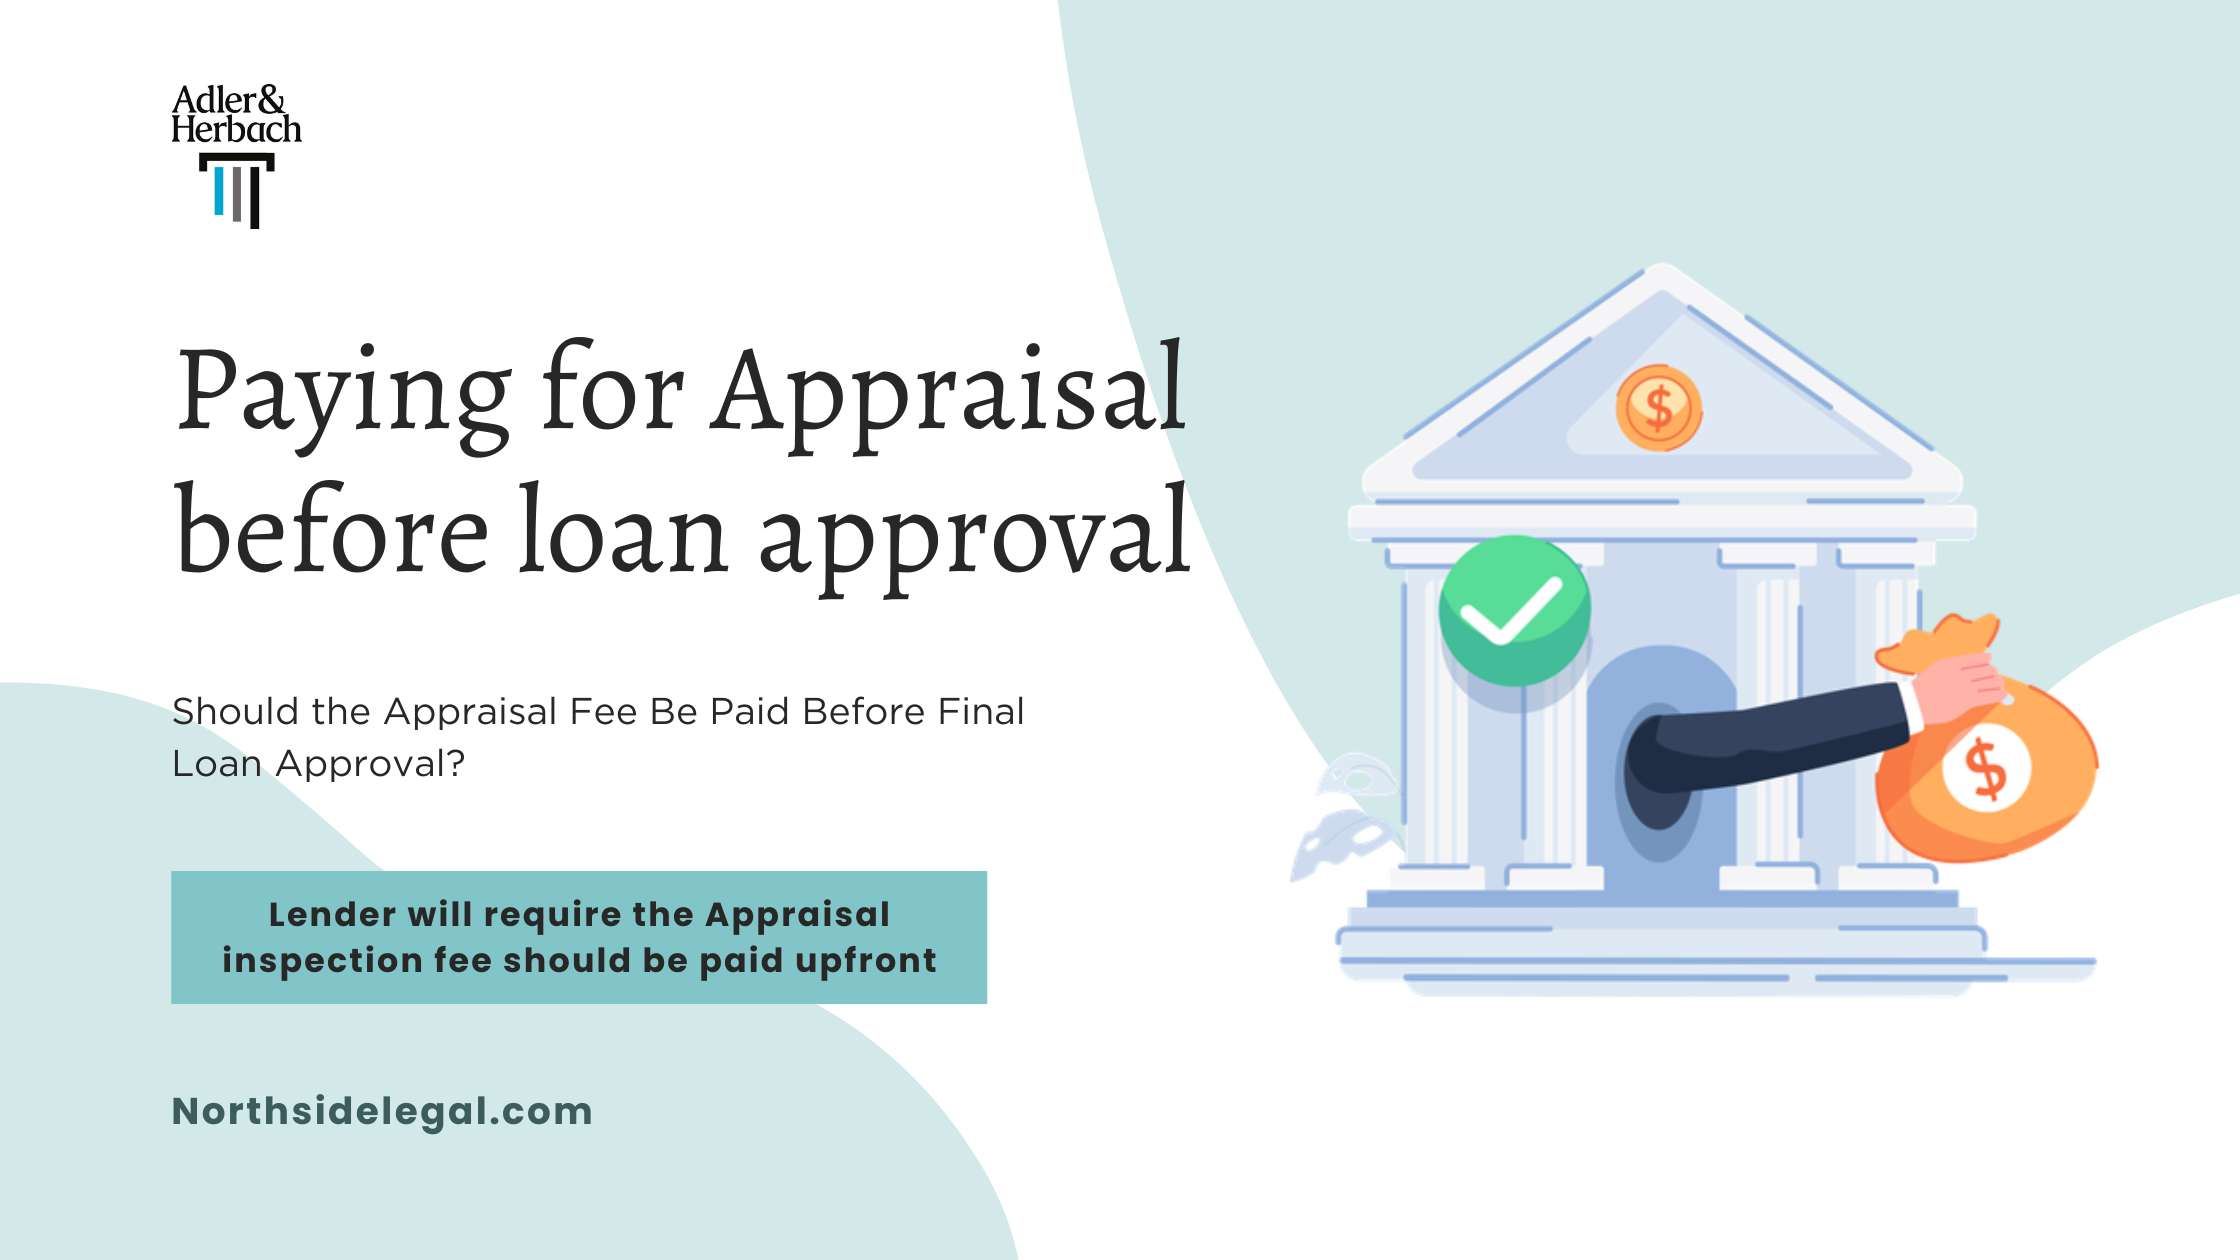 Paying for appraisal before loan approval